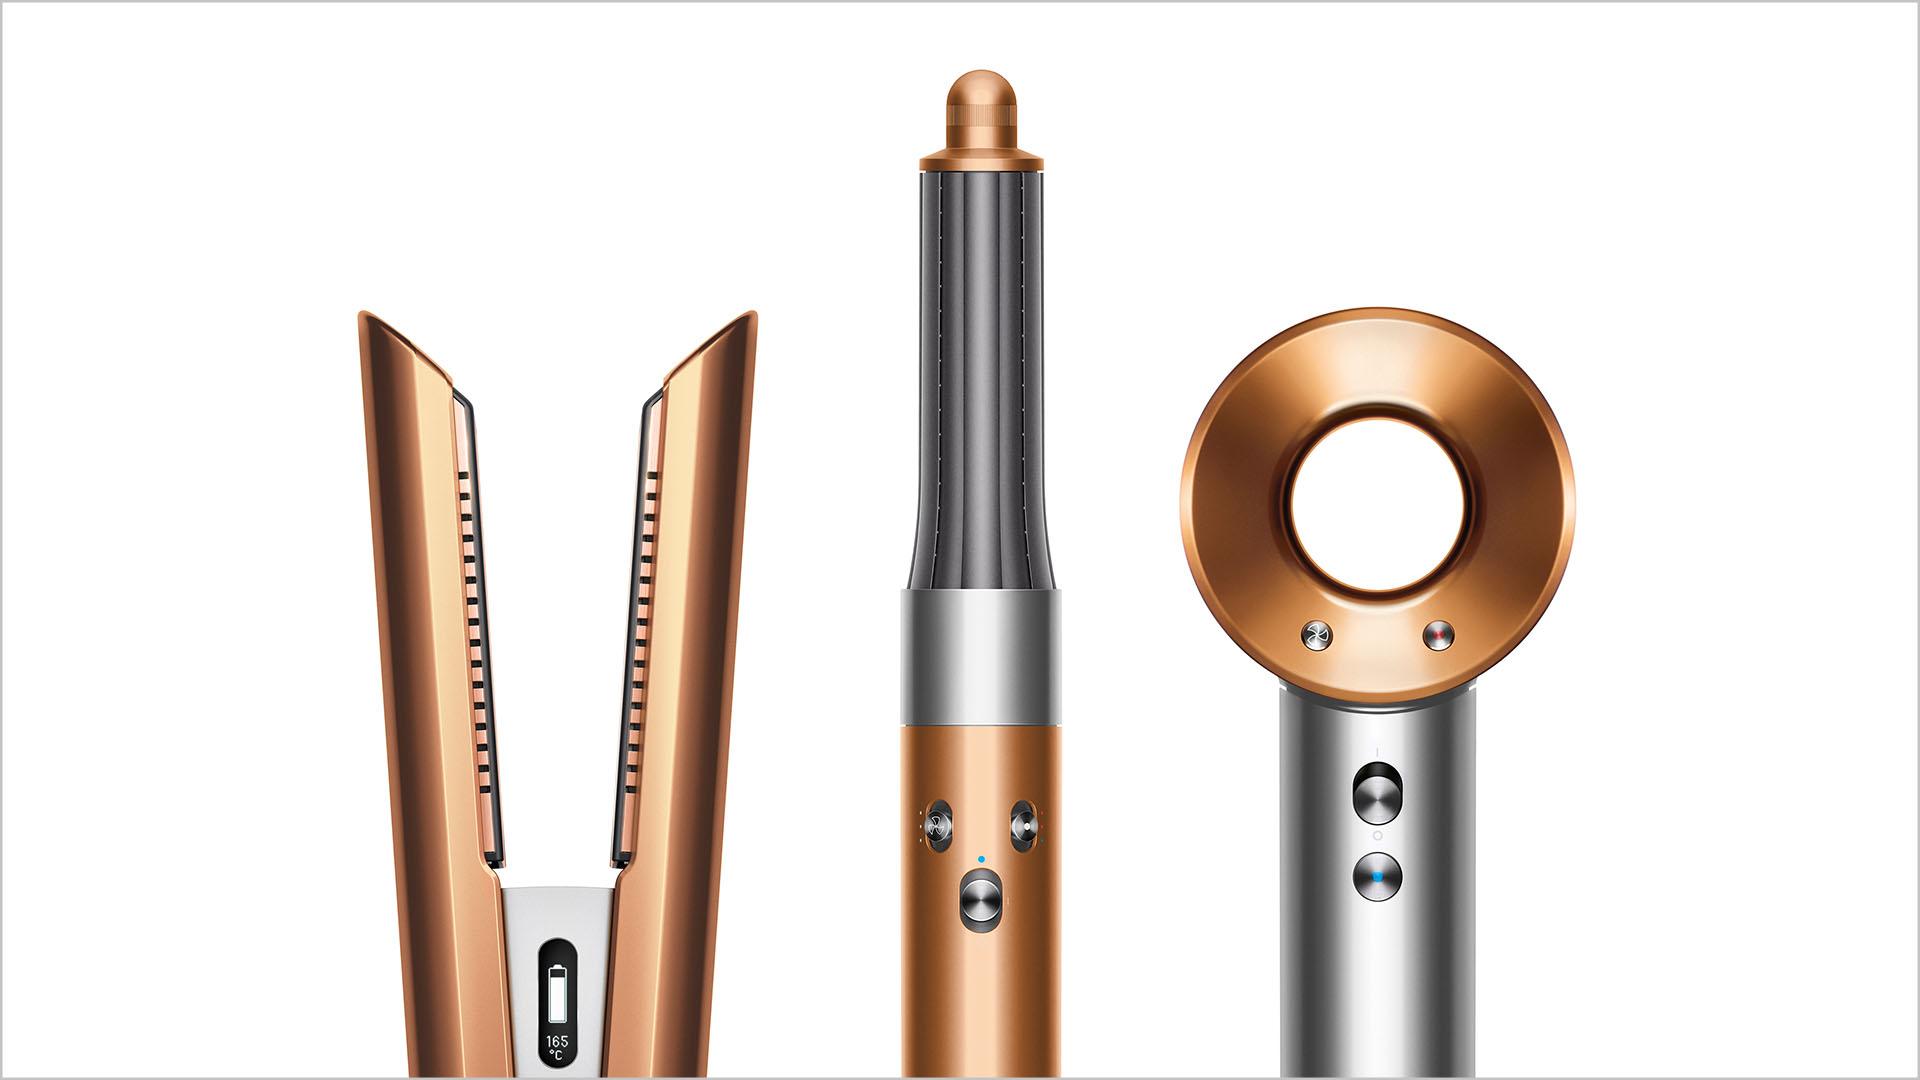 Image of the Dyson hair care range in copper